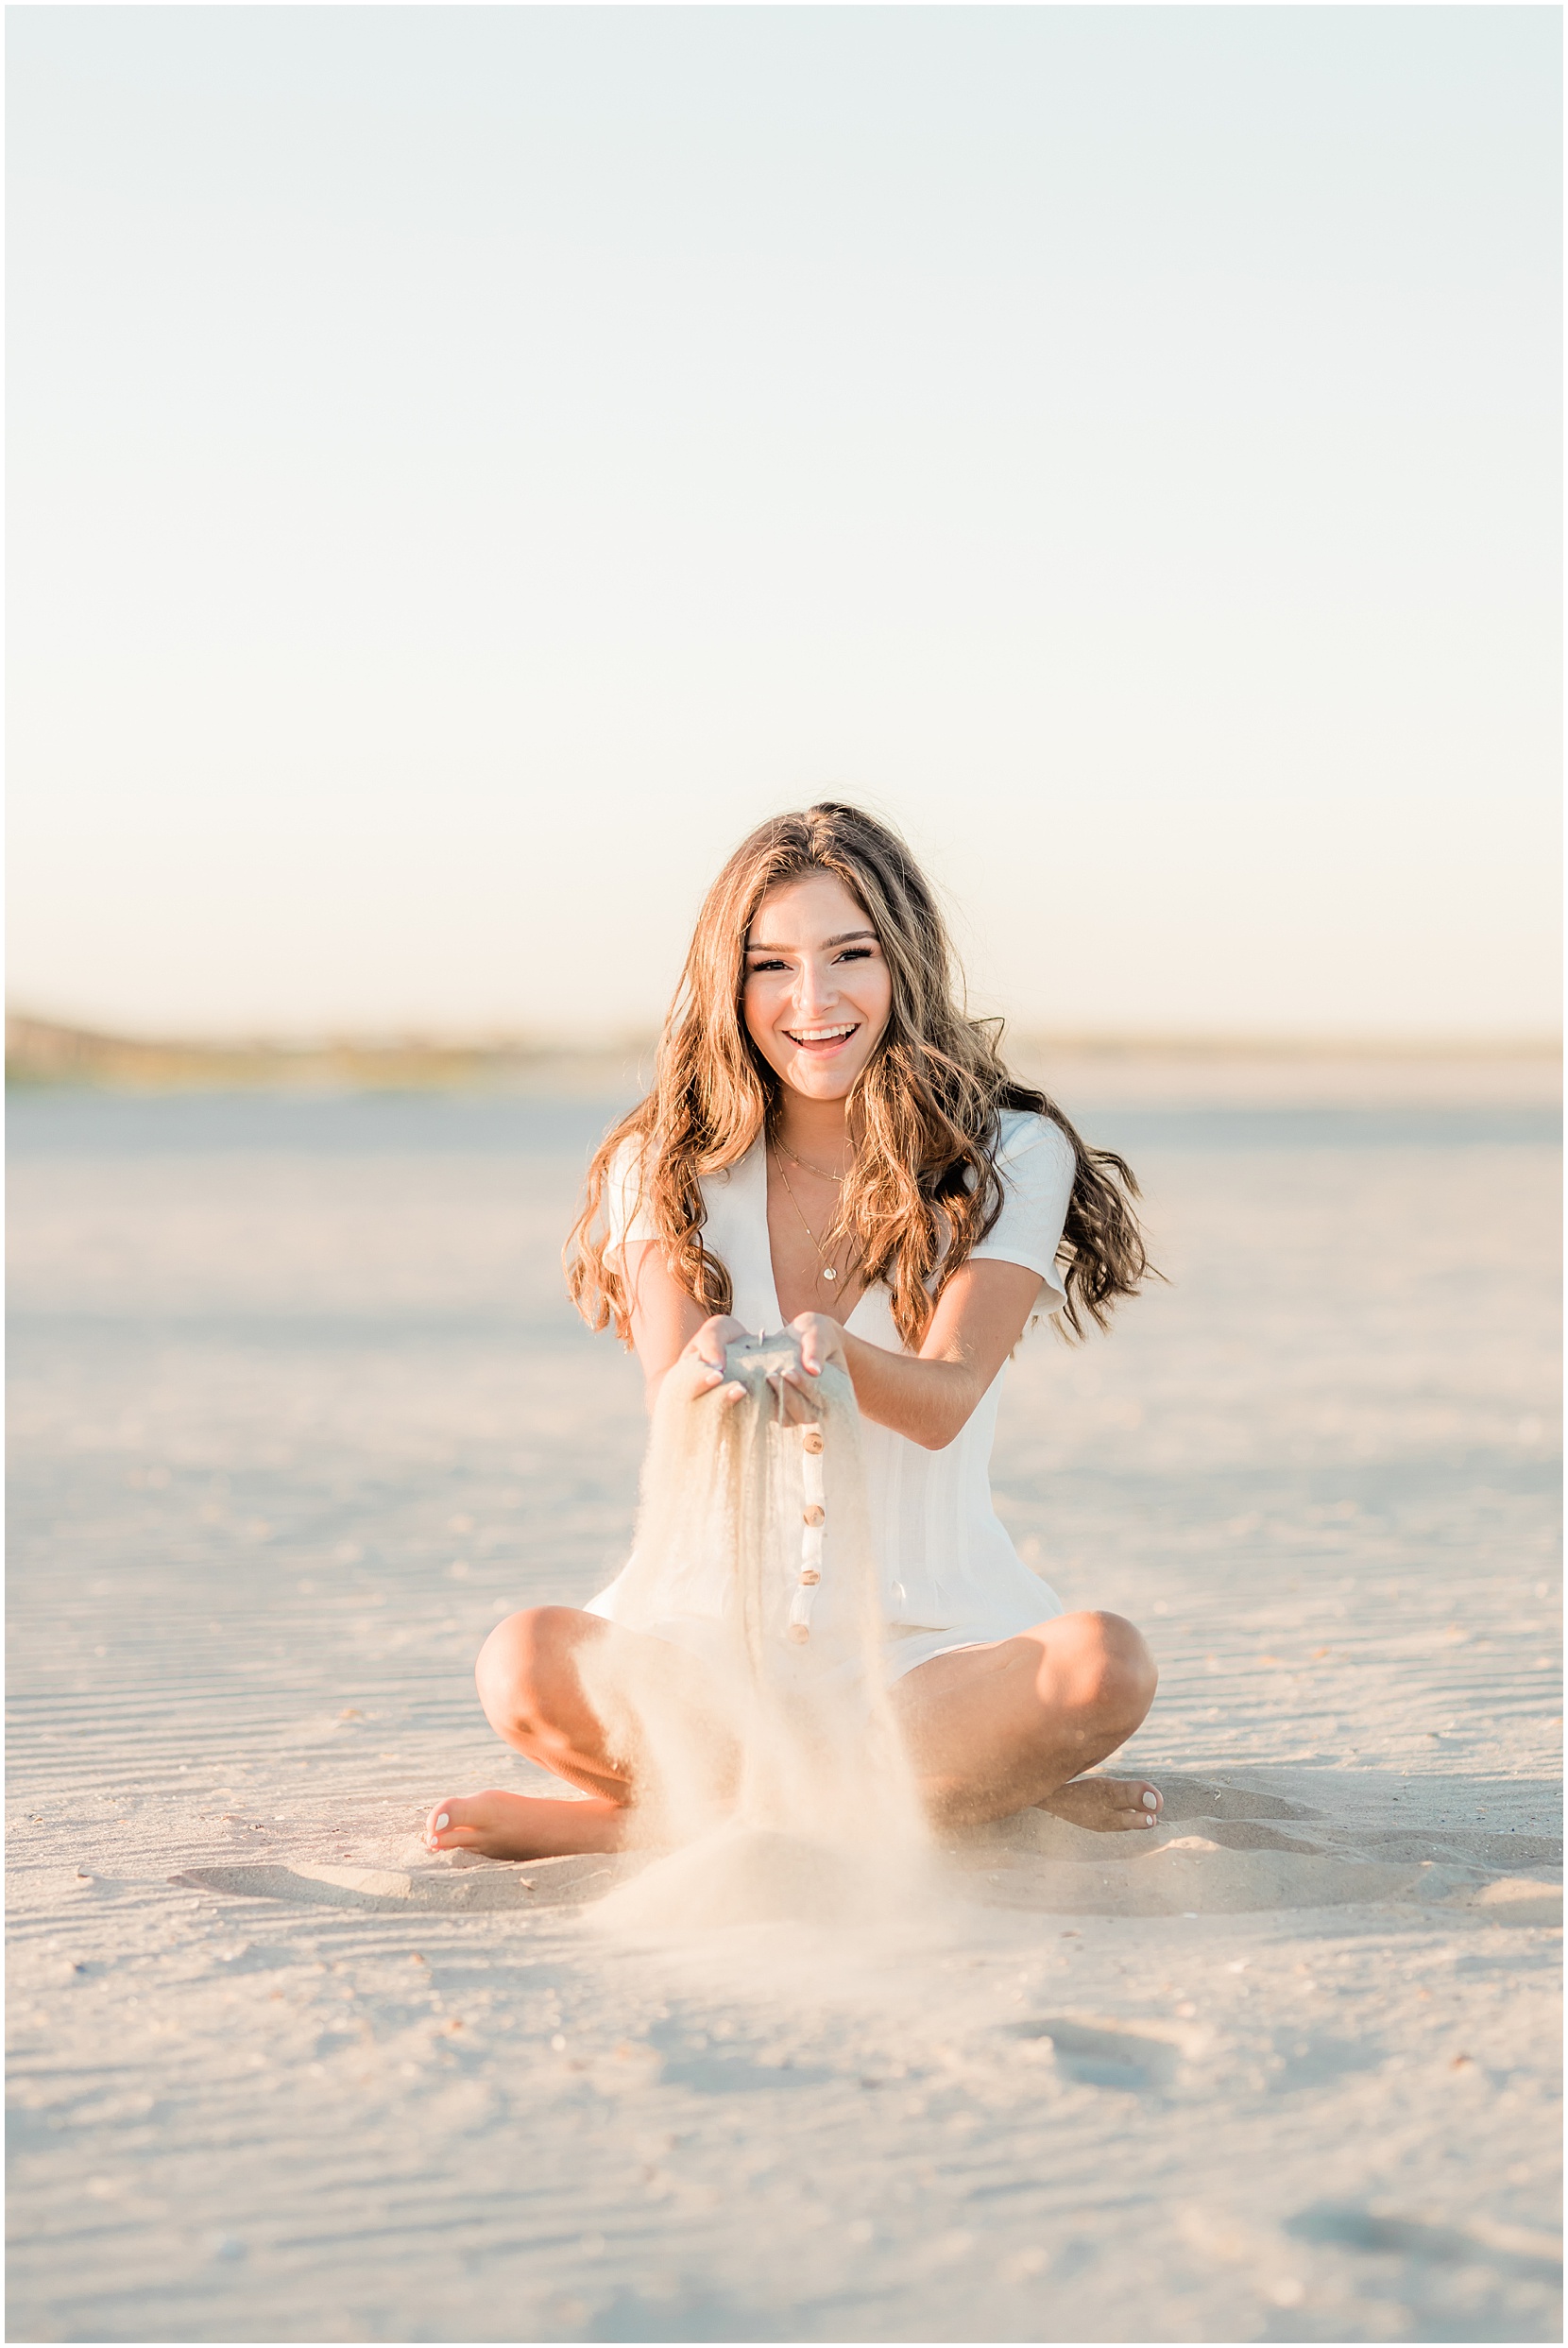 High school senior girl posing for senior pictures on the beach in ocean city new jersey. she is wearing a white romper and she is playing in the sand. the sun is golden!